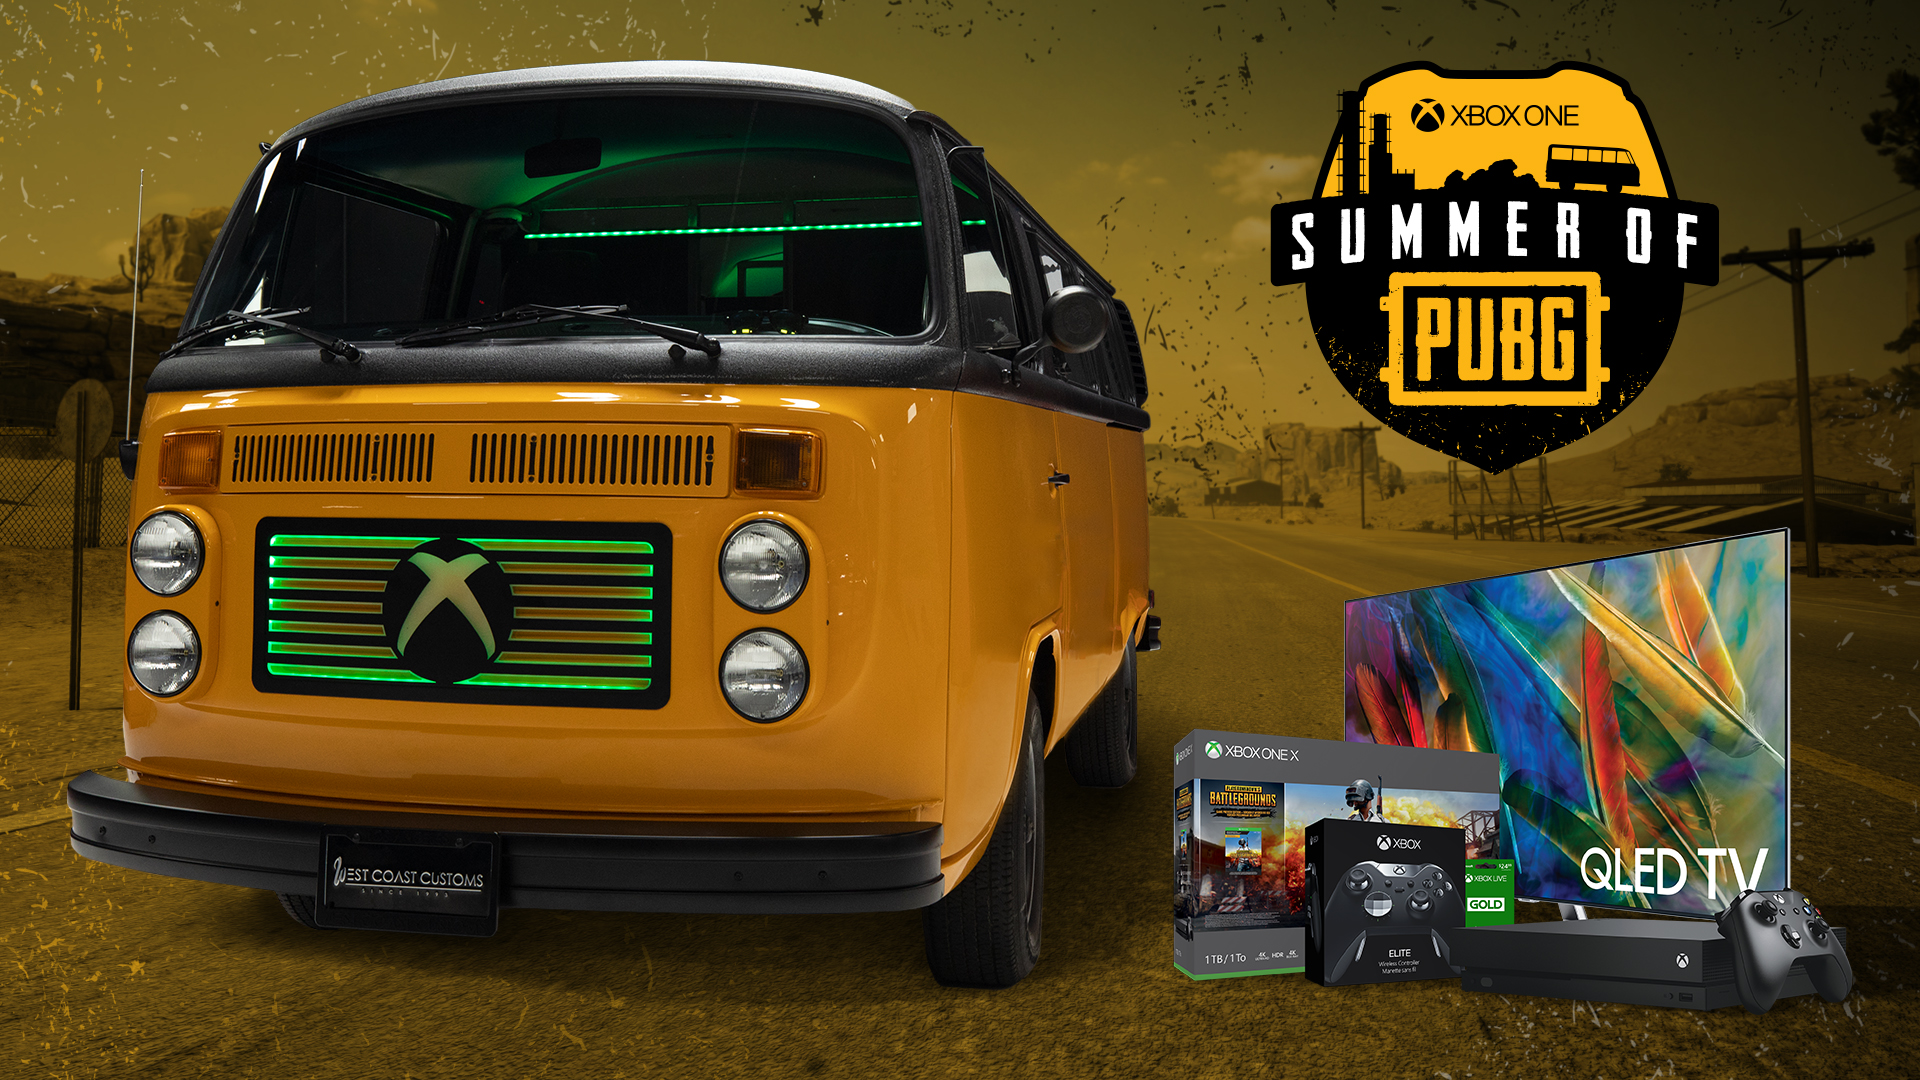 Xbox One Summer of PUBG Sweepstakes